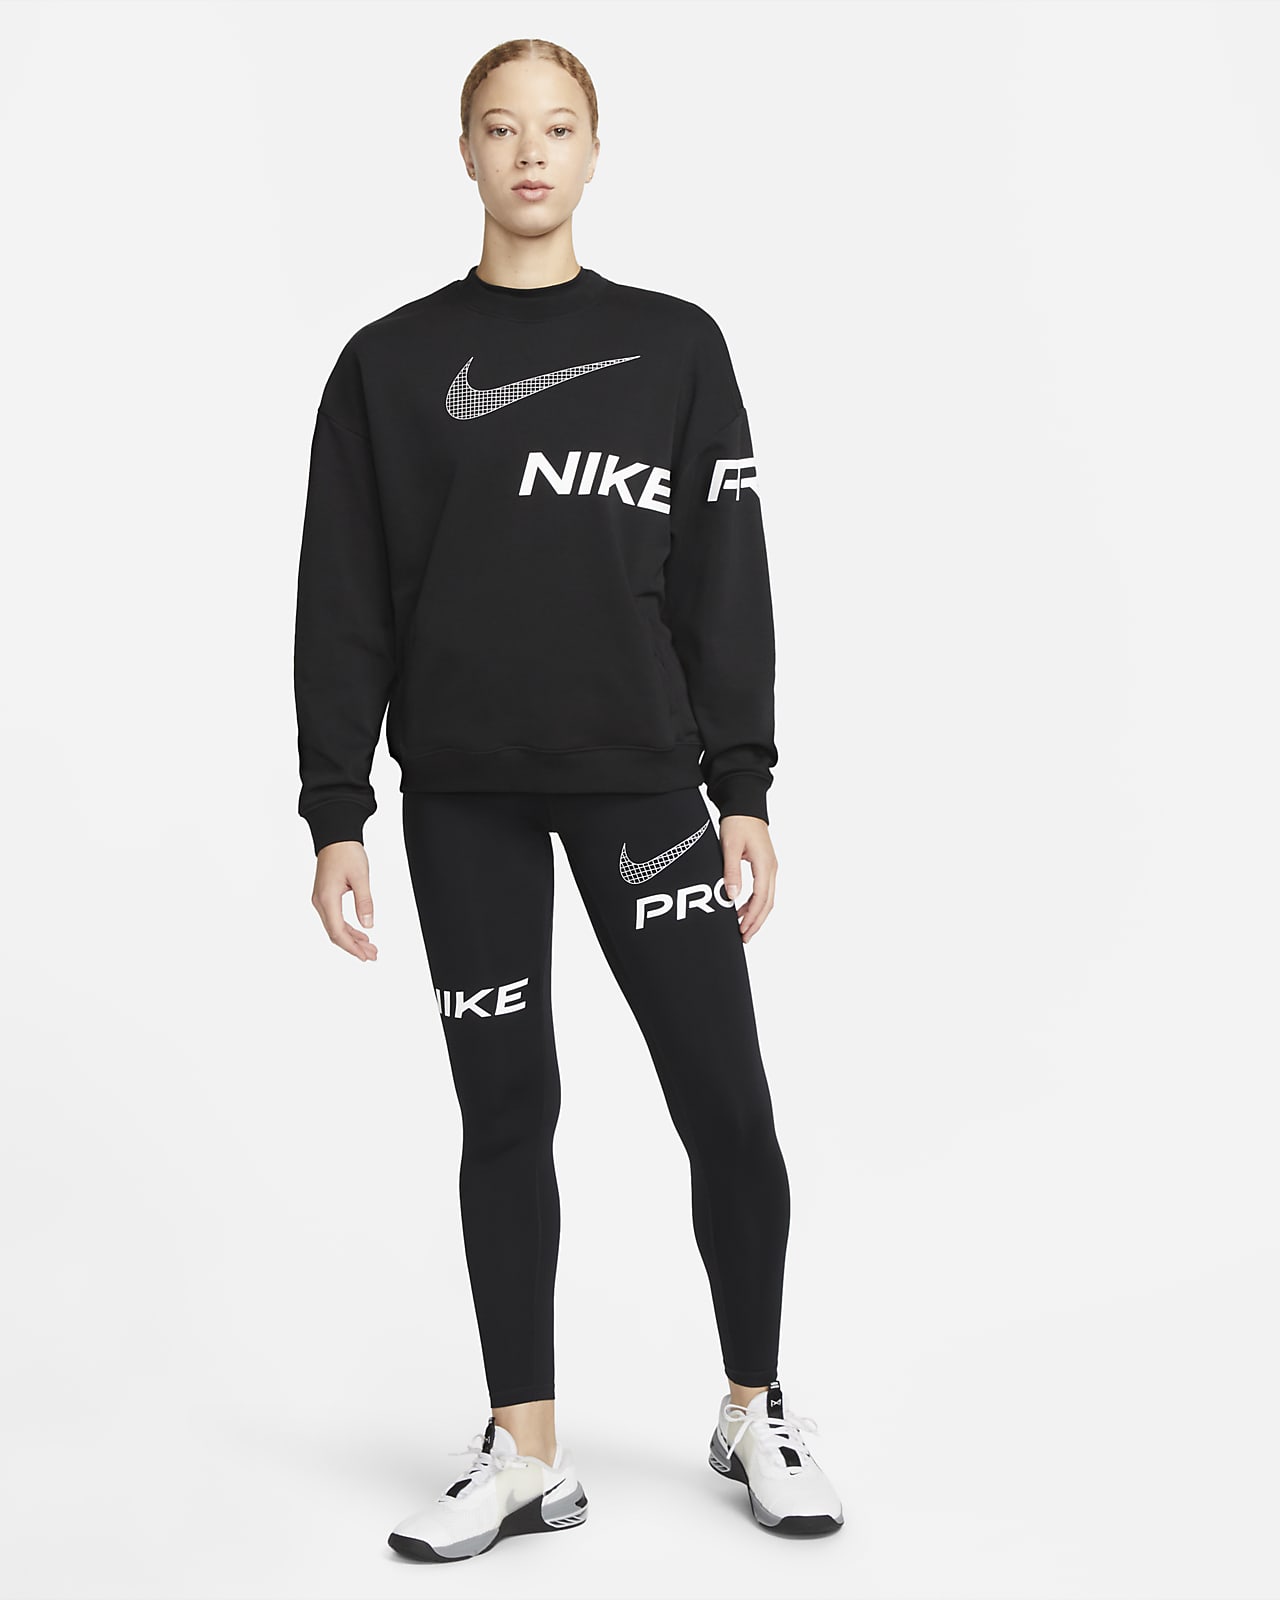 Nike Dri-FIT Get Fit Women's French Terry Graphic Crew-Neck Sweatshirt ...